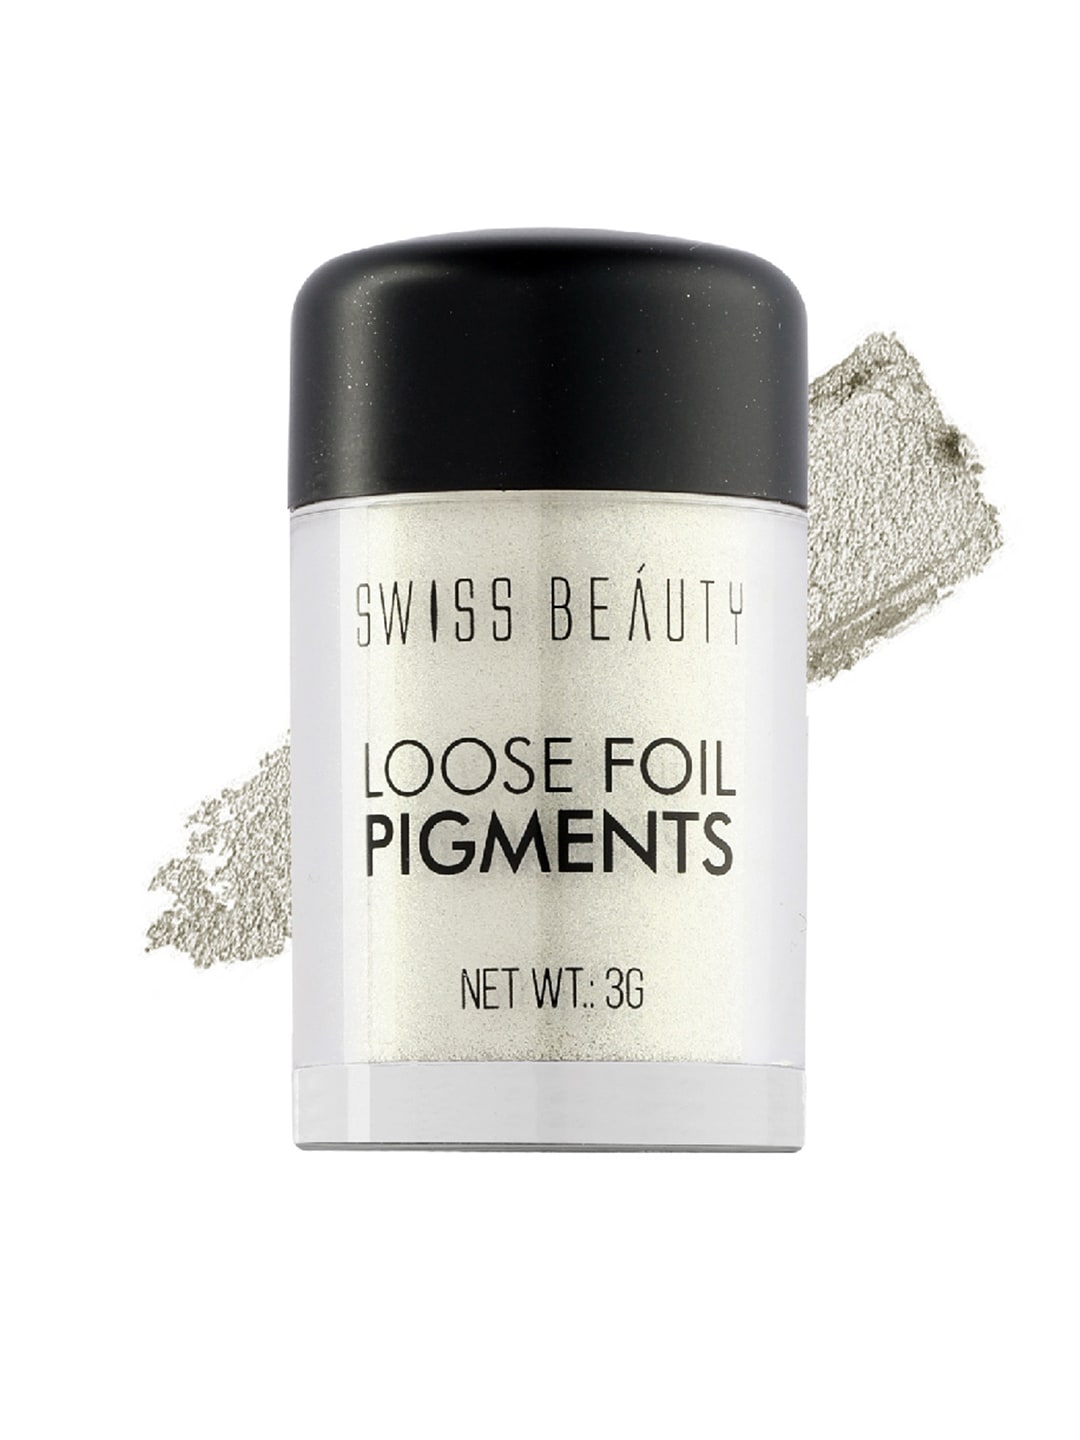 SWISS BEAUTY Loose Foil Pigments Eyeshadow - Shade-11, 3g Price in India